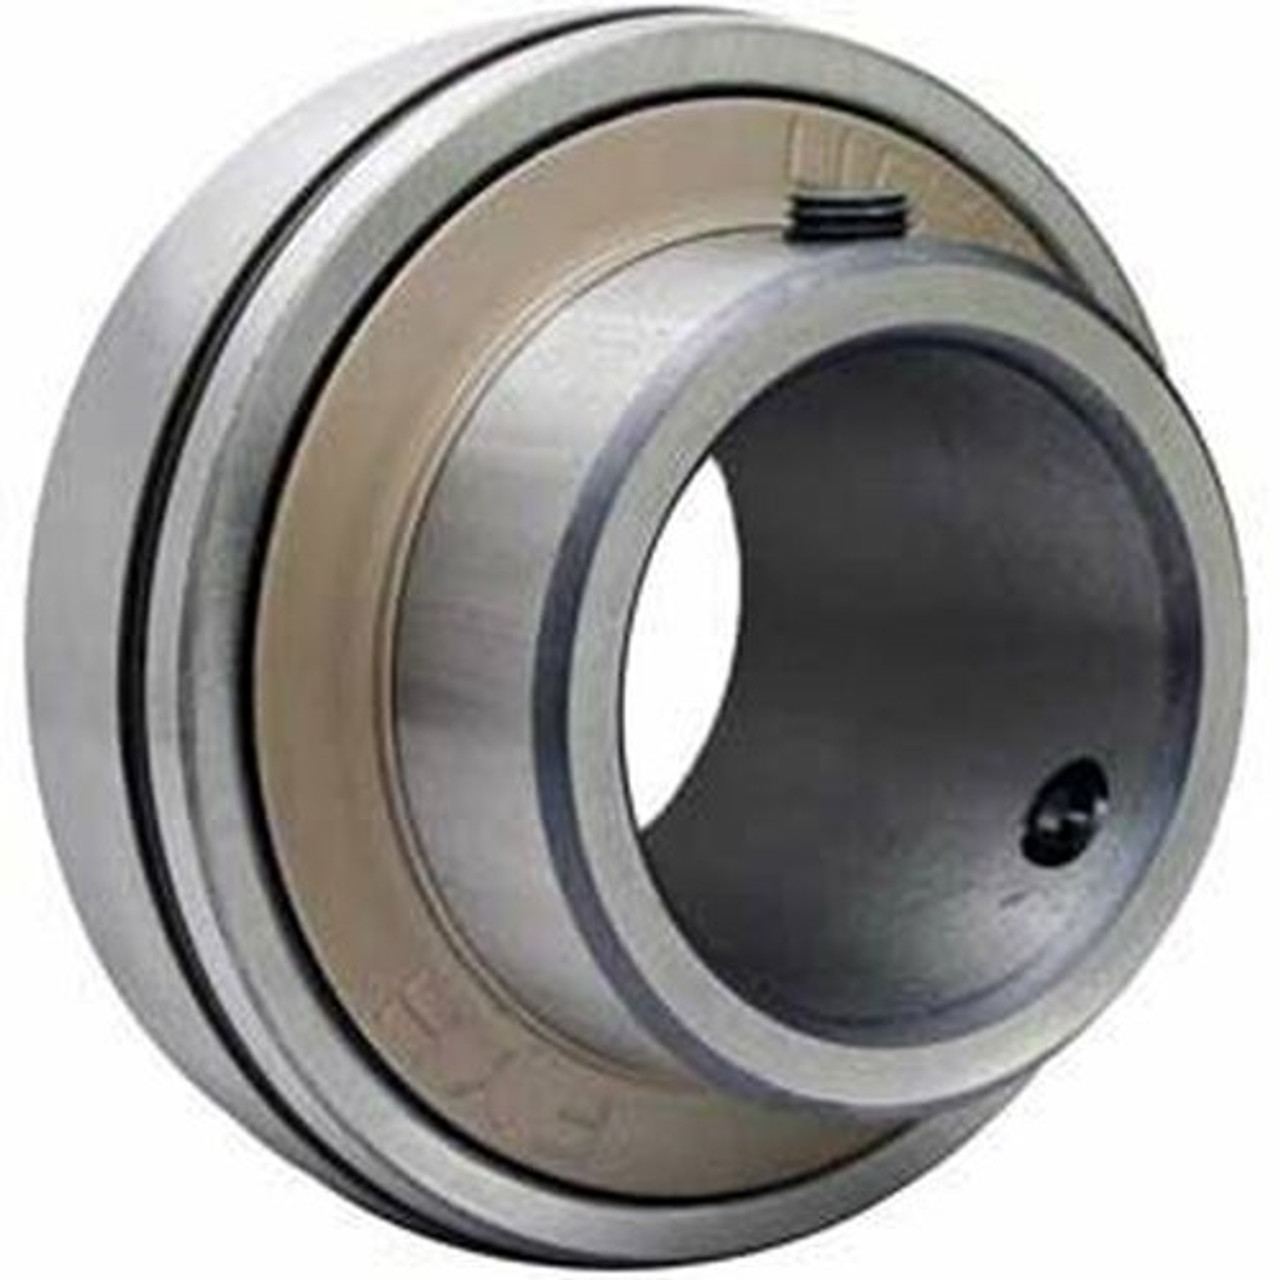 Details about   NEW FYH UC209-28G5 BEARING UNIT